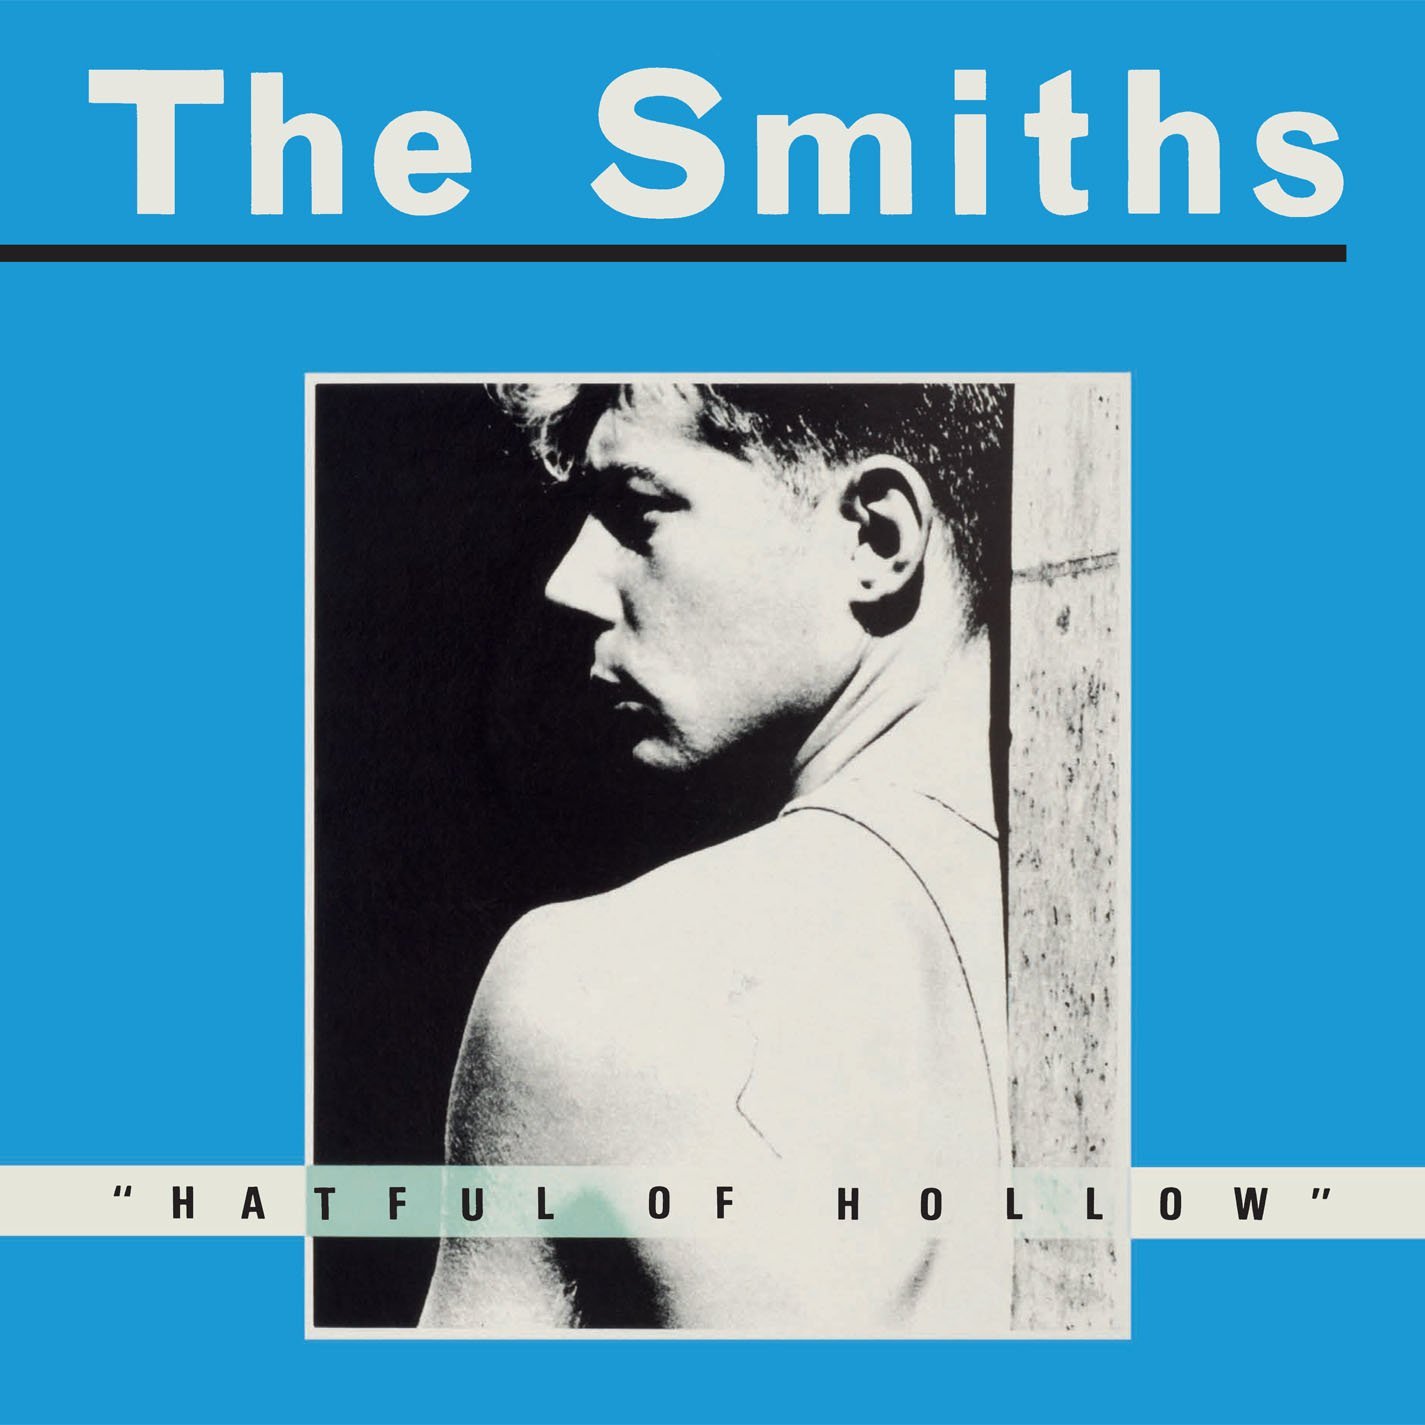 VINIL The Smiths - Hatful of hollow